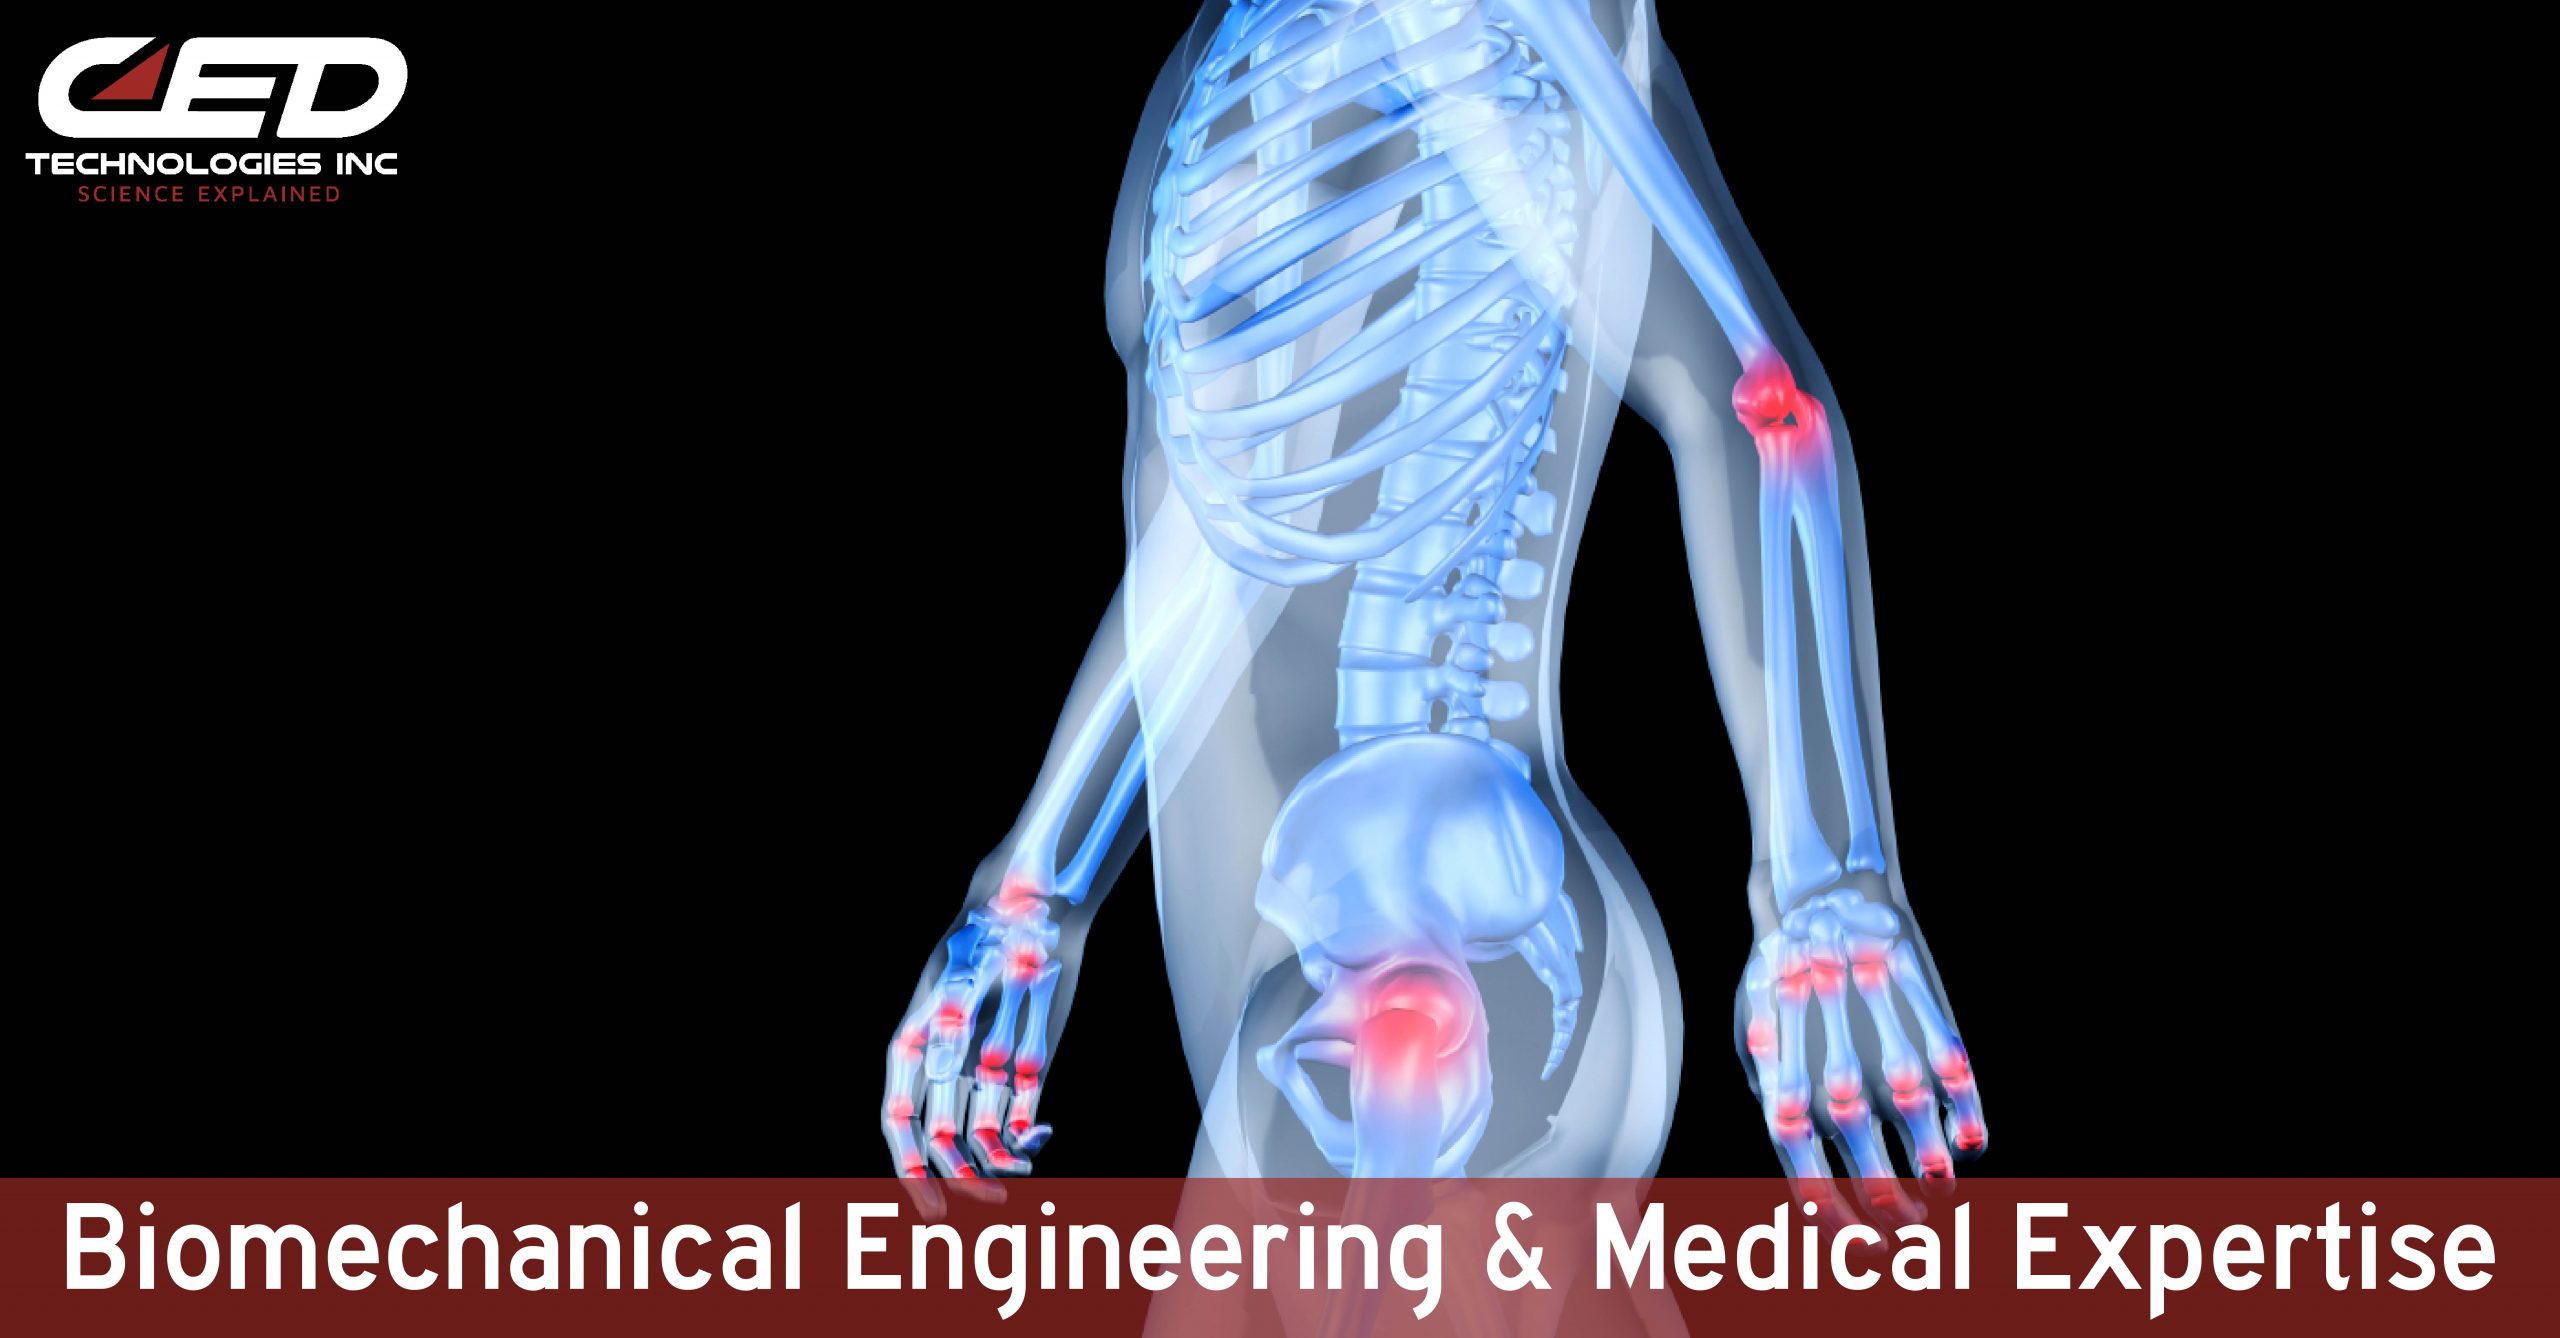 Biomechanical Engineering and Medical Expertise: Working in Conjunction